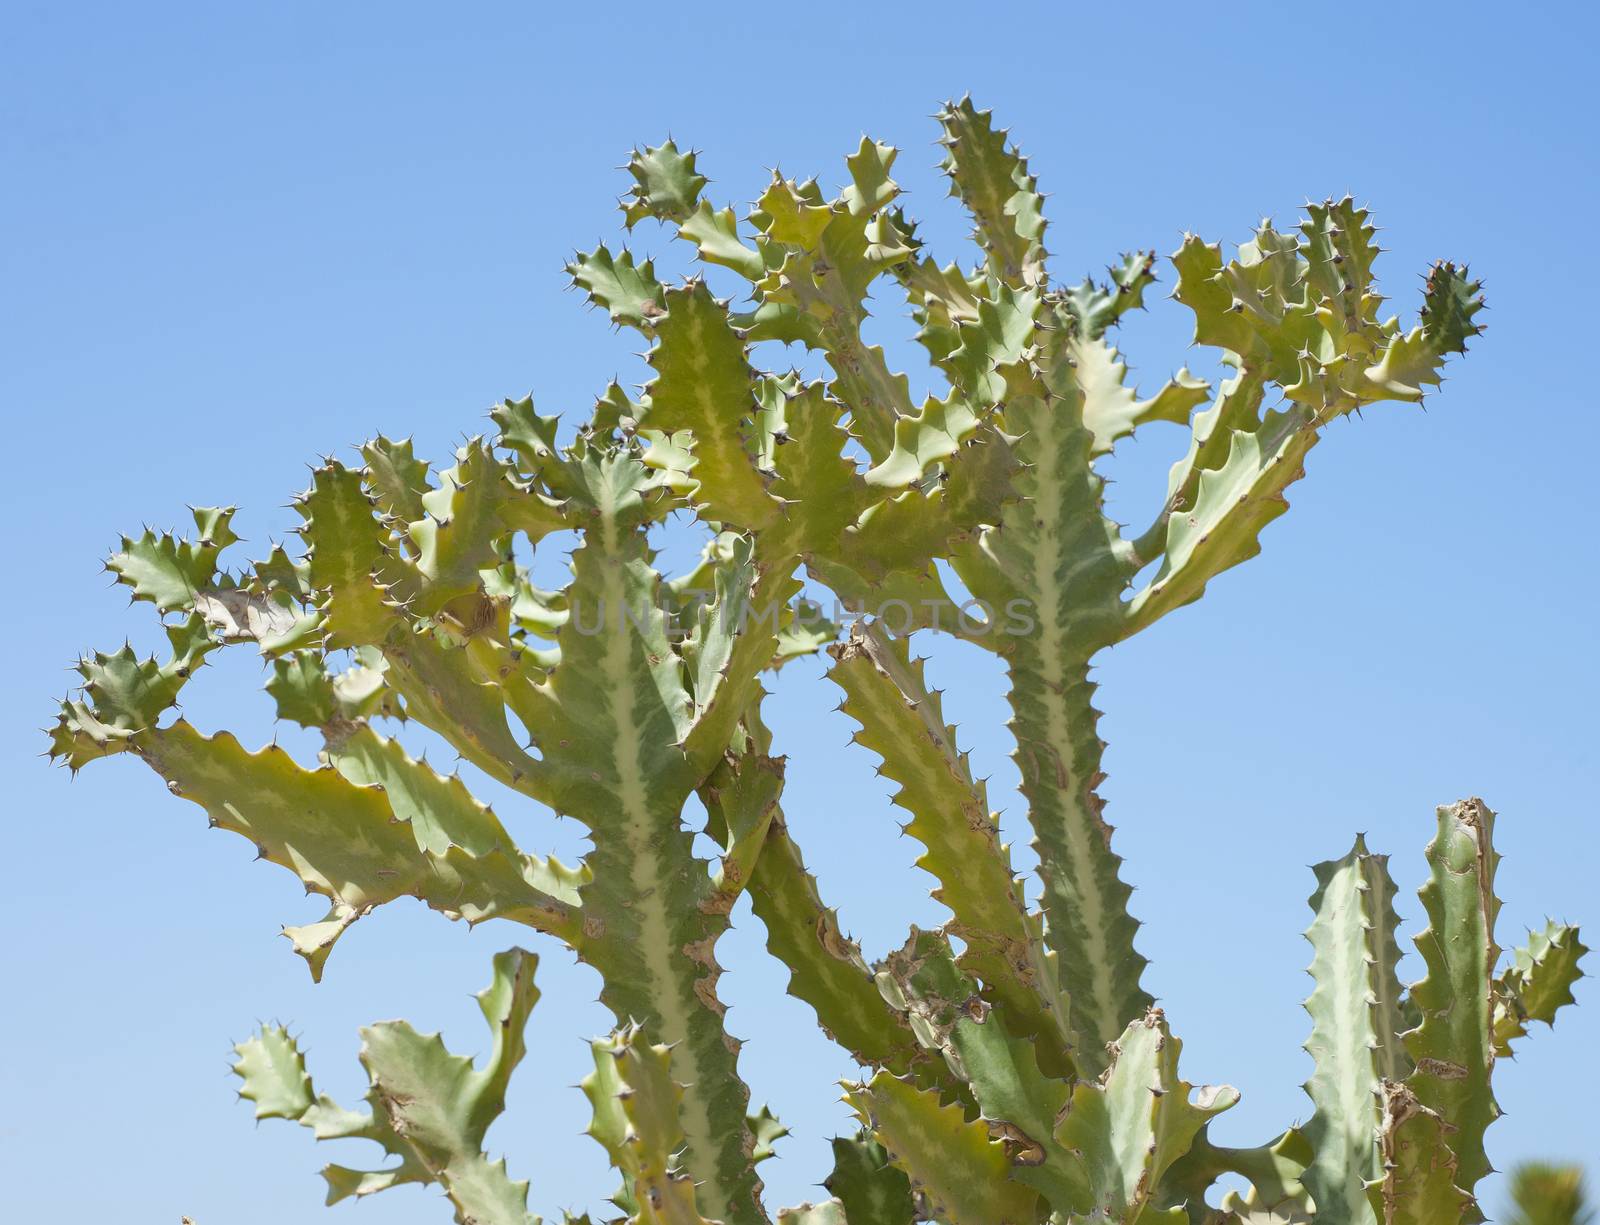 Top of a branching cactus against a blue sky background